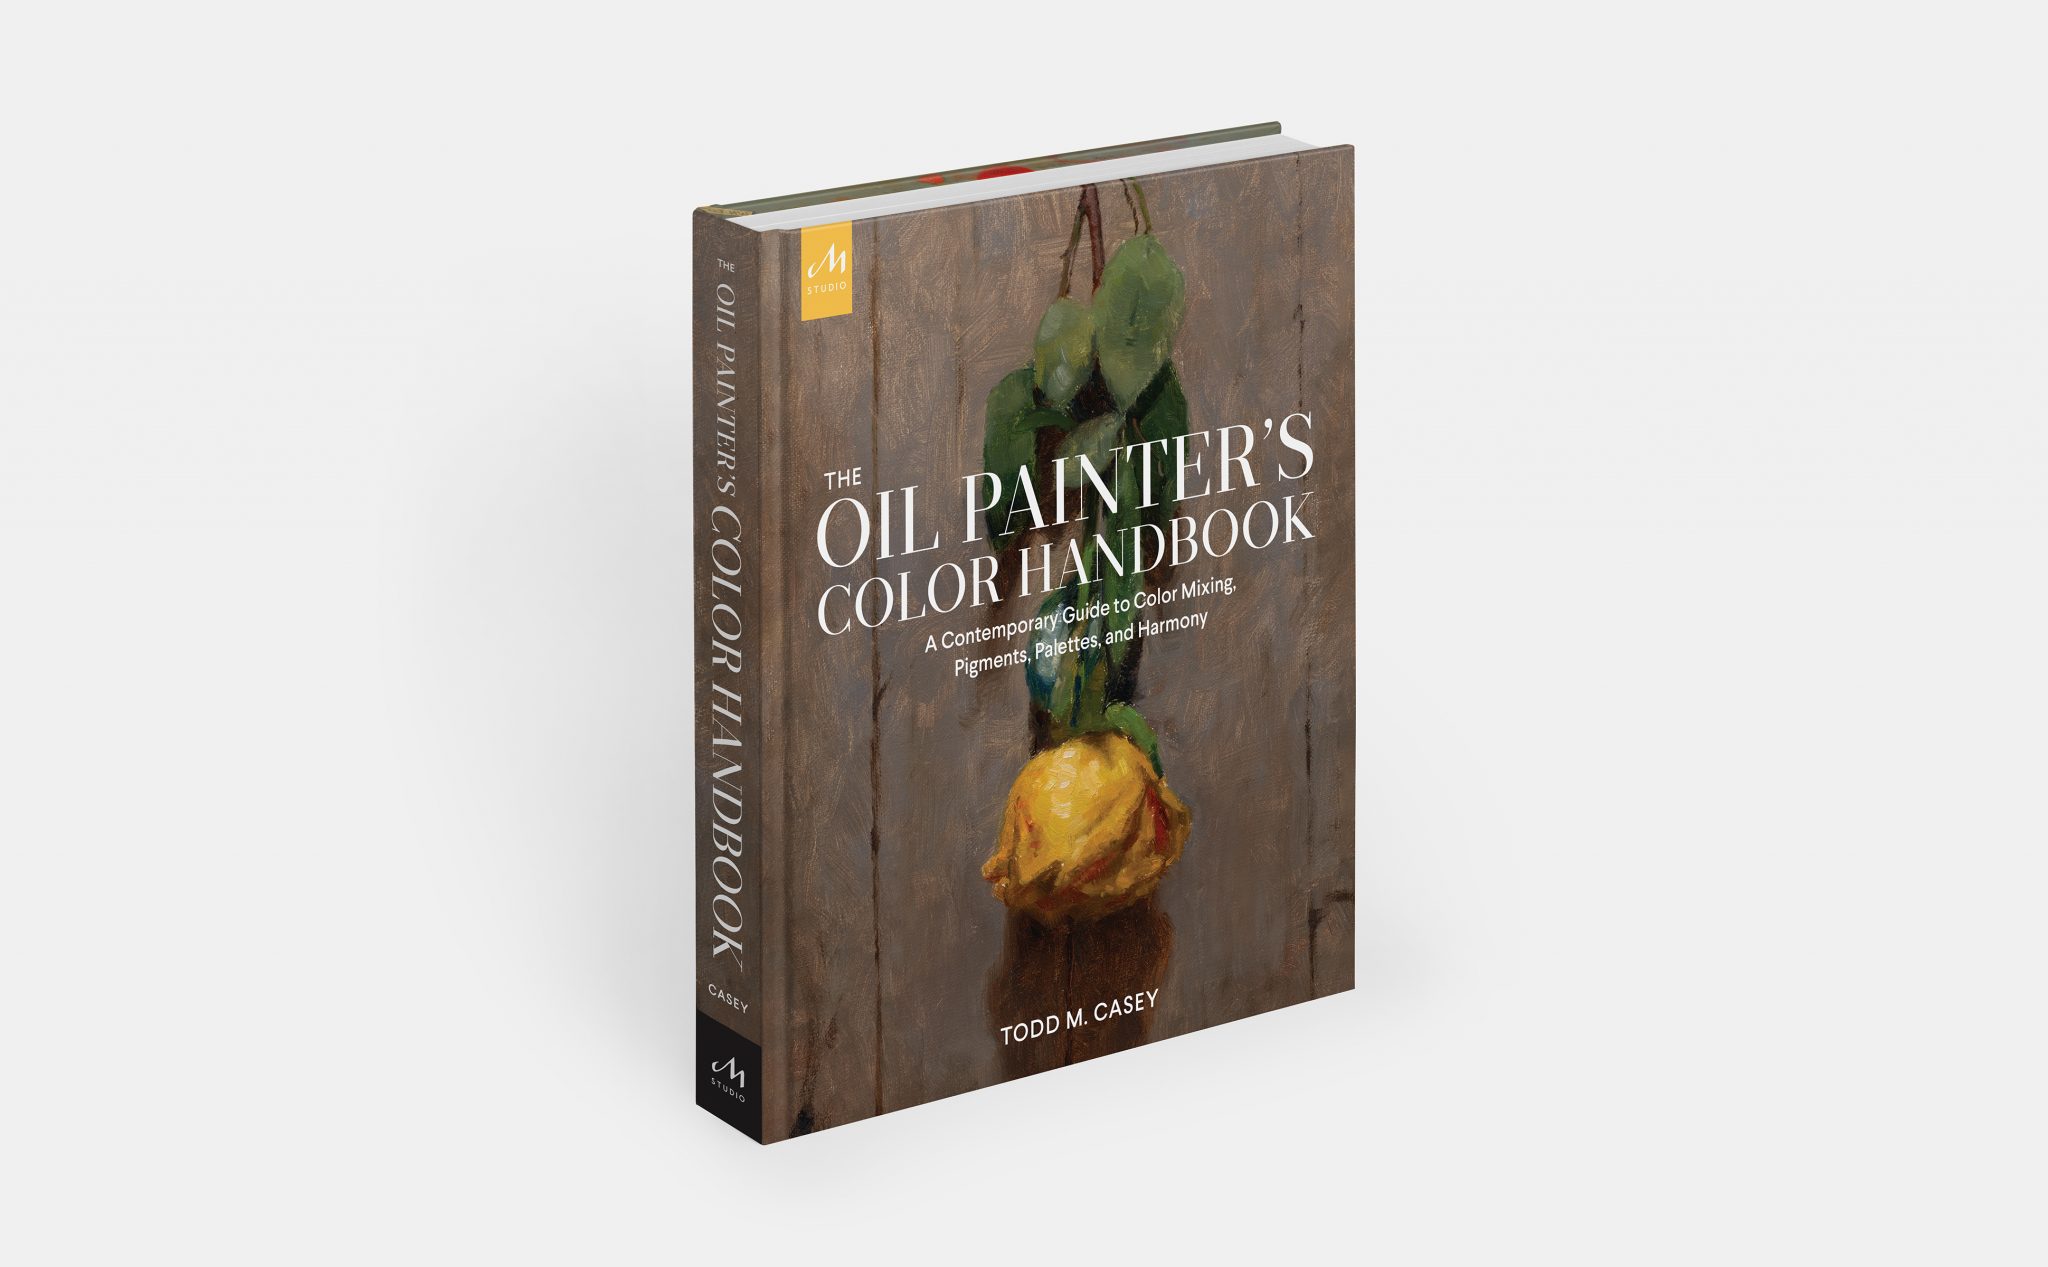 The Oil Painters Color Handbook Ae 5883 3d Standing Front 3880 2048x1267 